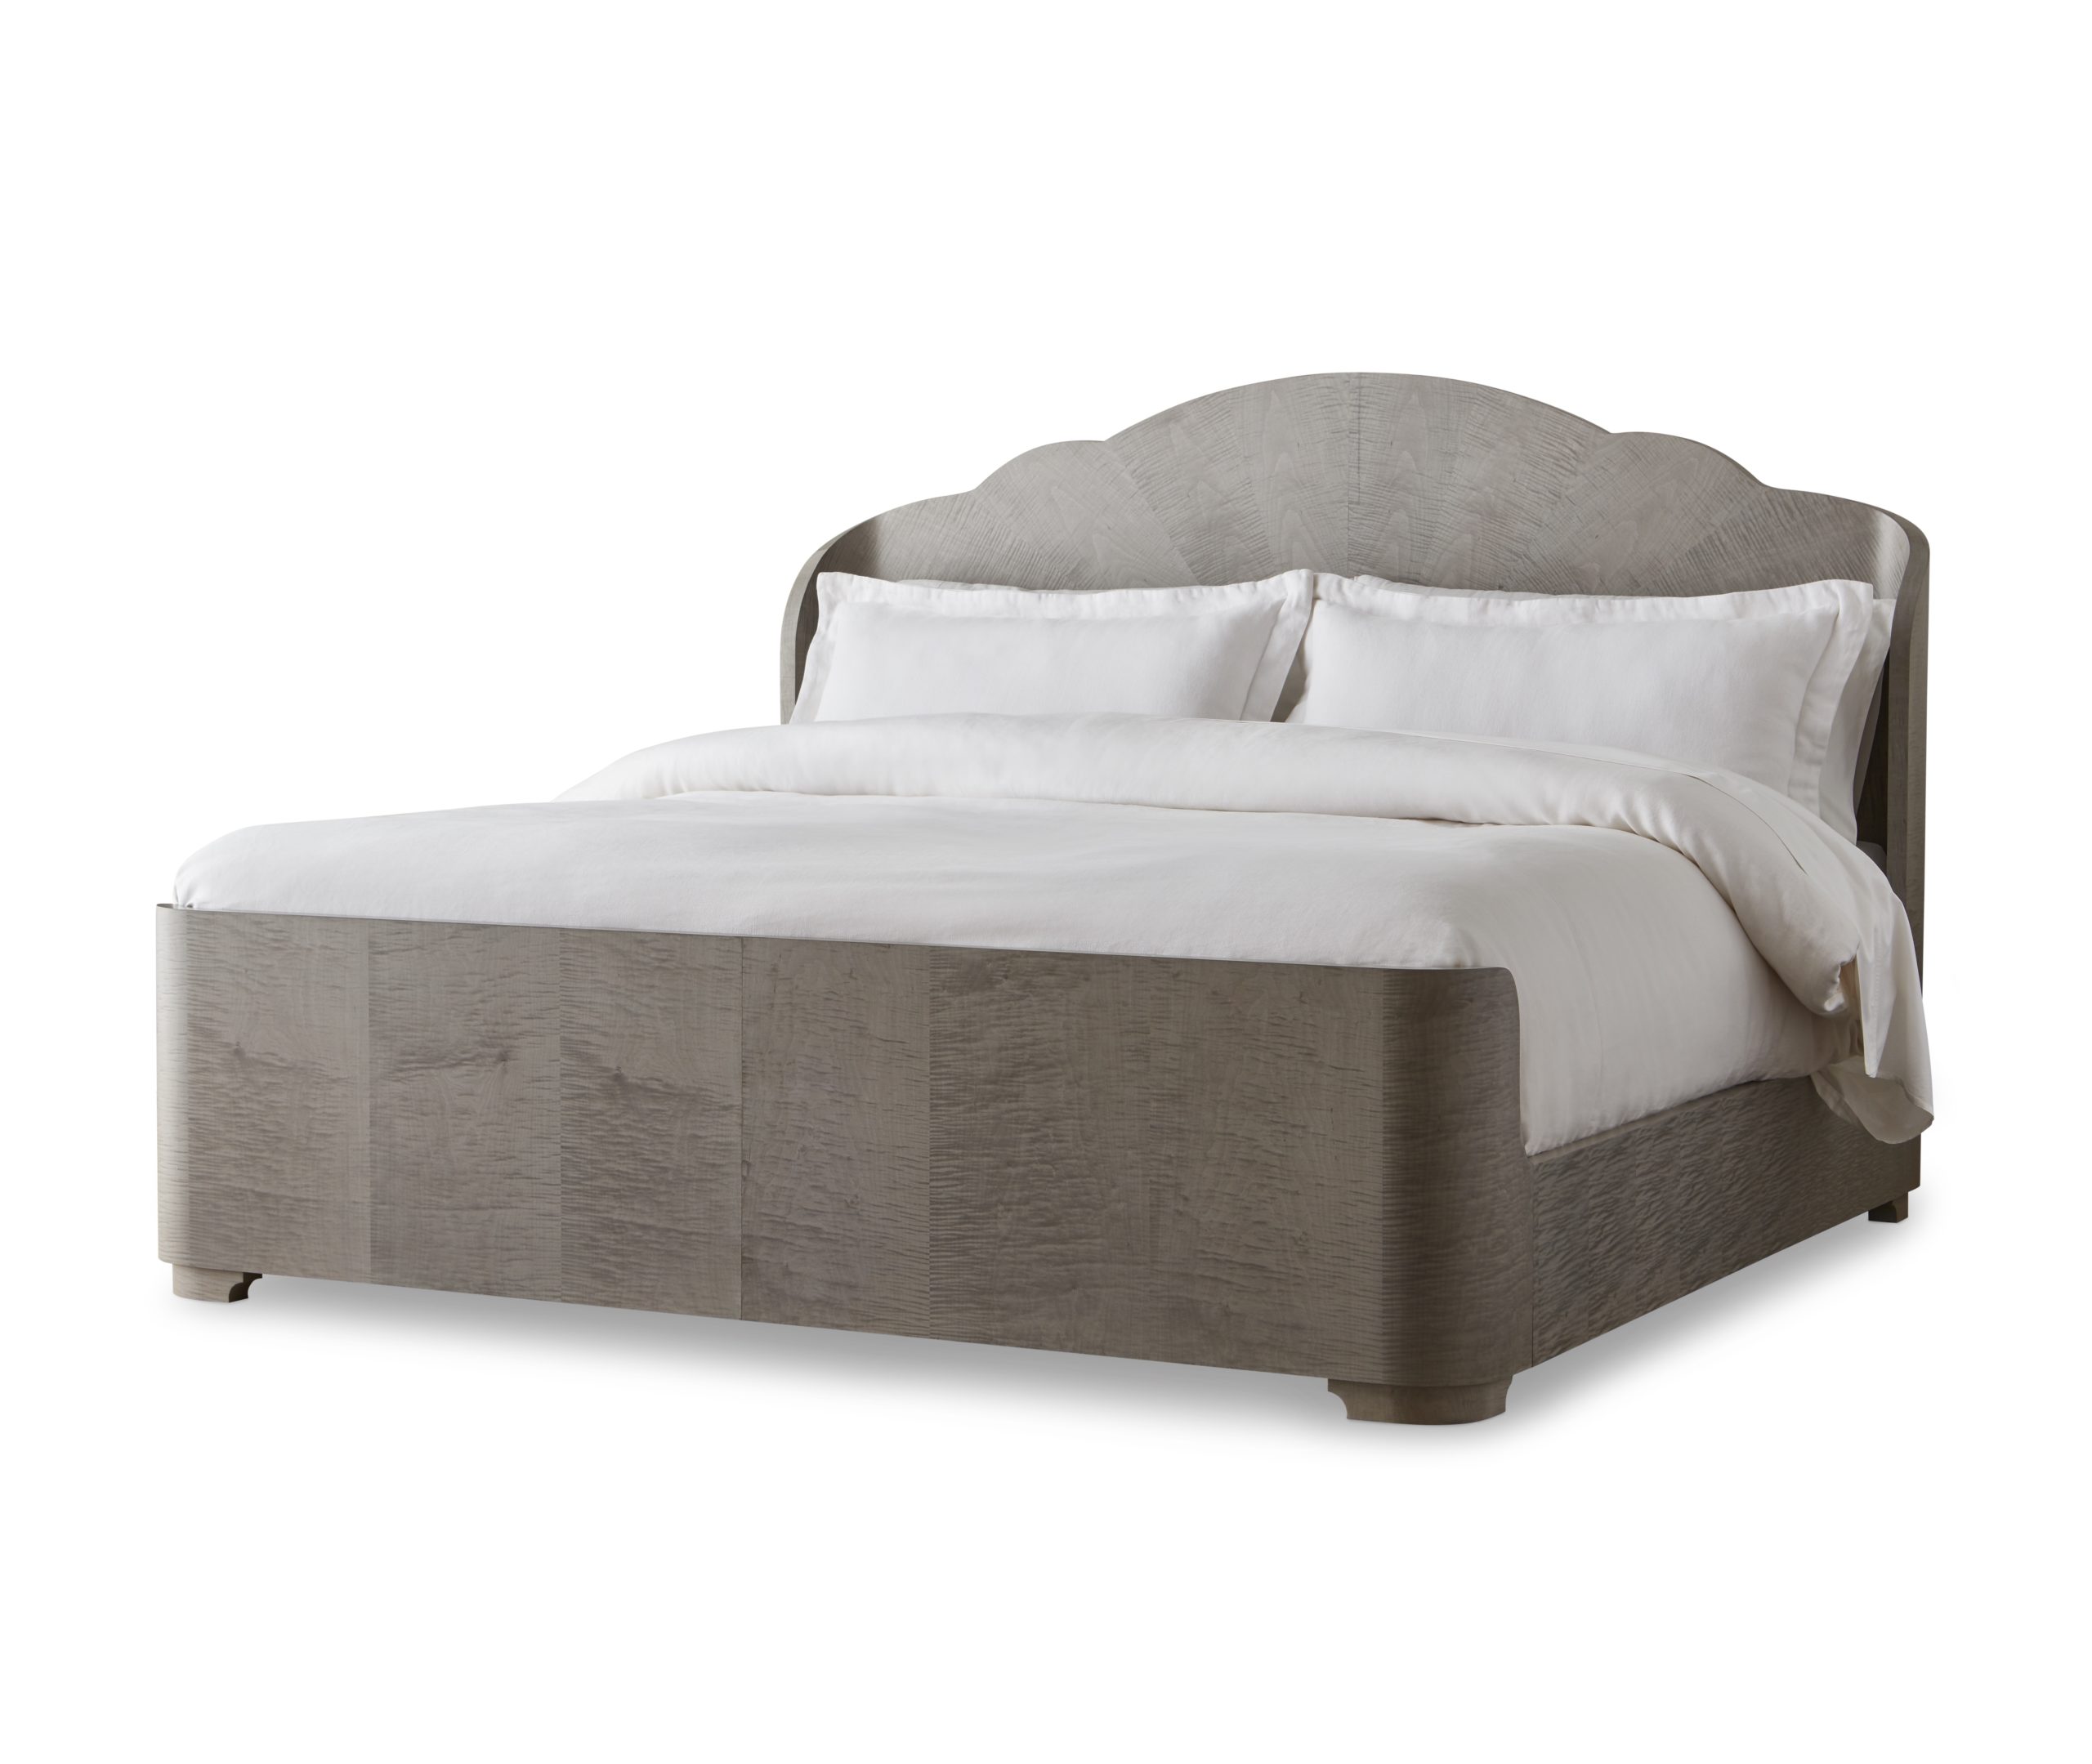 Baker_products_WNWN_adriana_bed_BAA3220_FRONT_3QRT-scaled-2